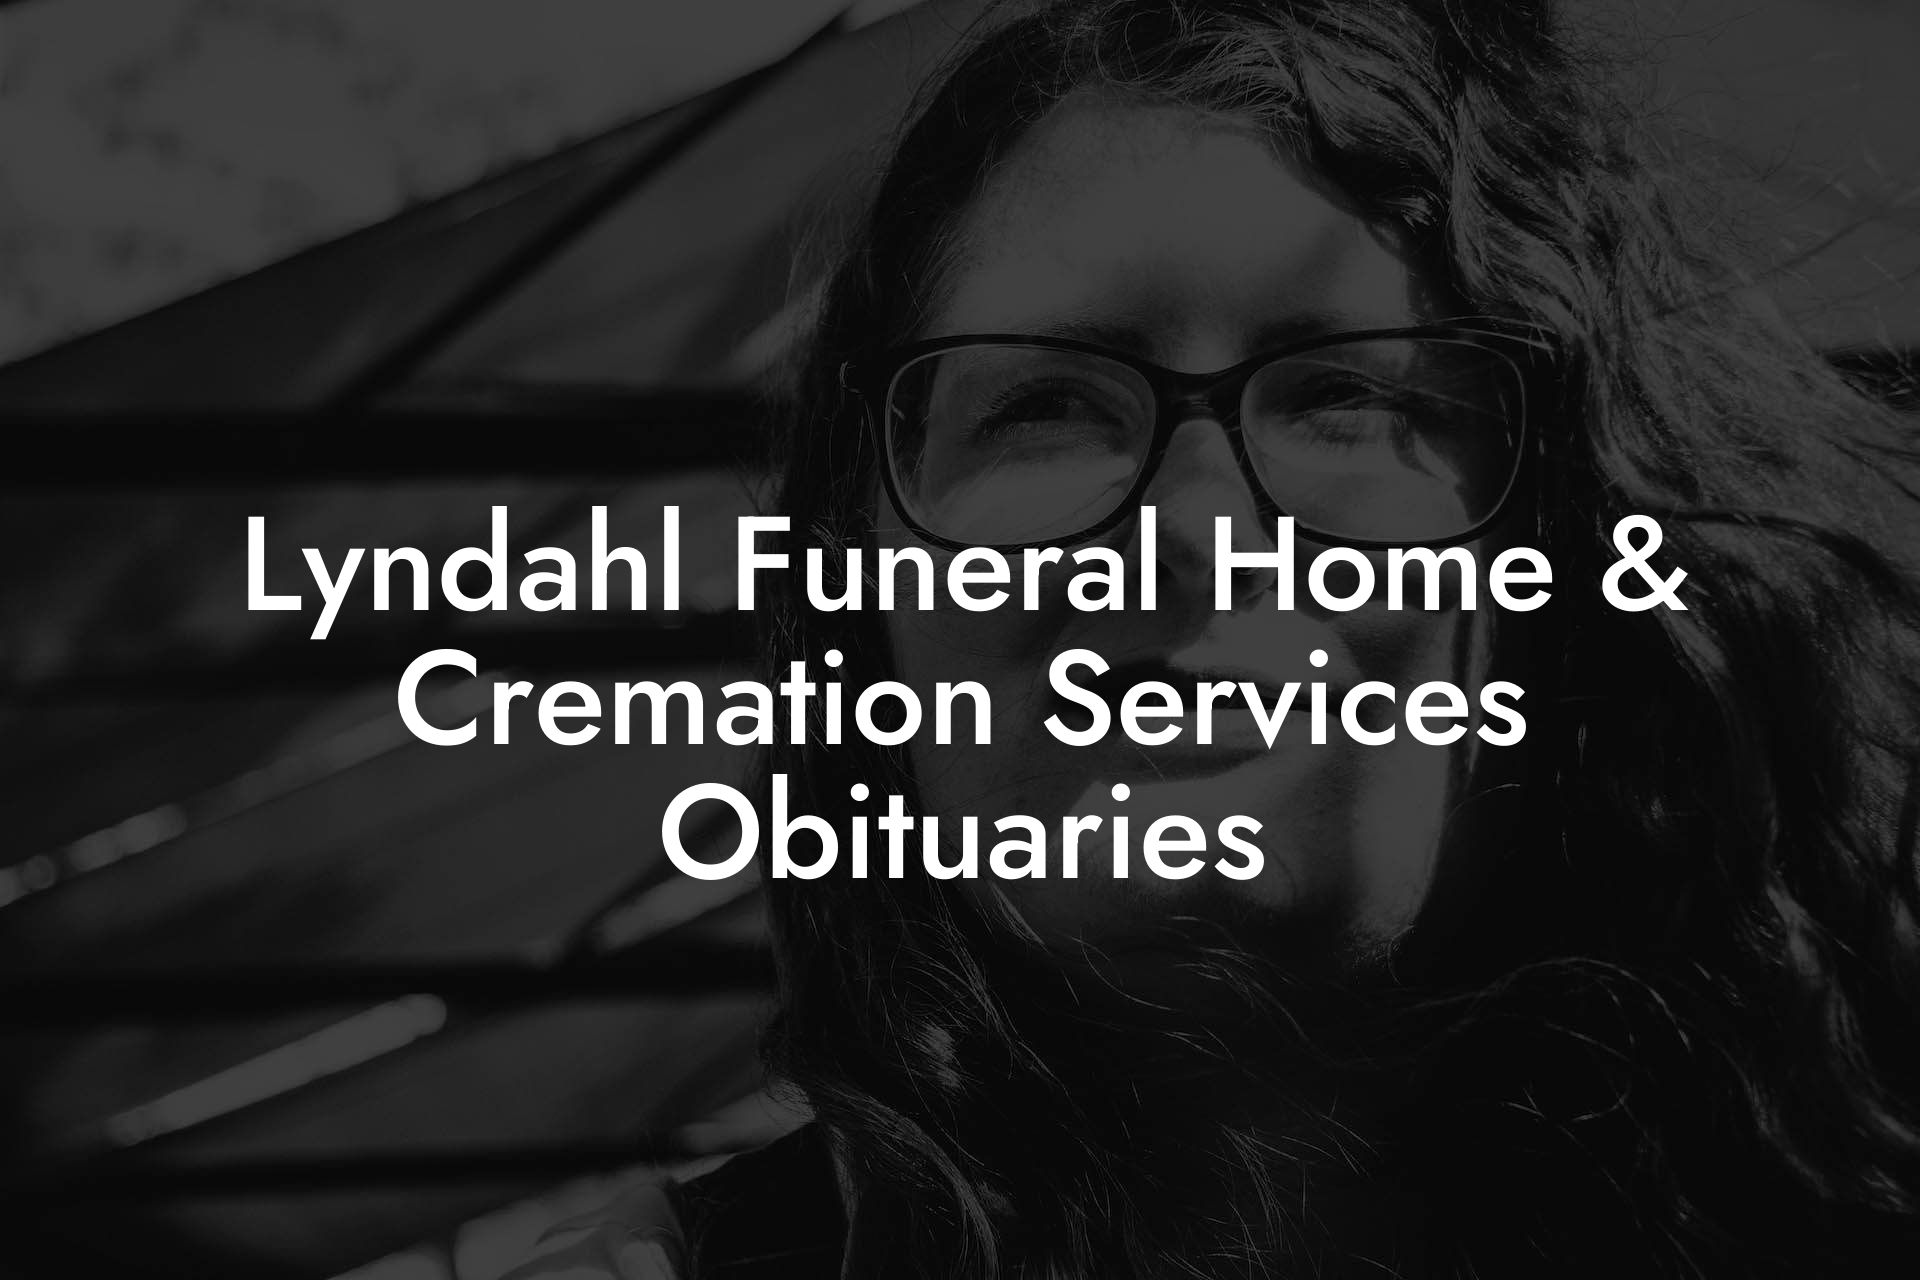 Lyndahl Funeral Home & Cremation Services Obituaries